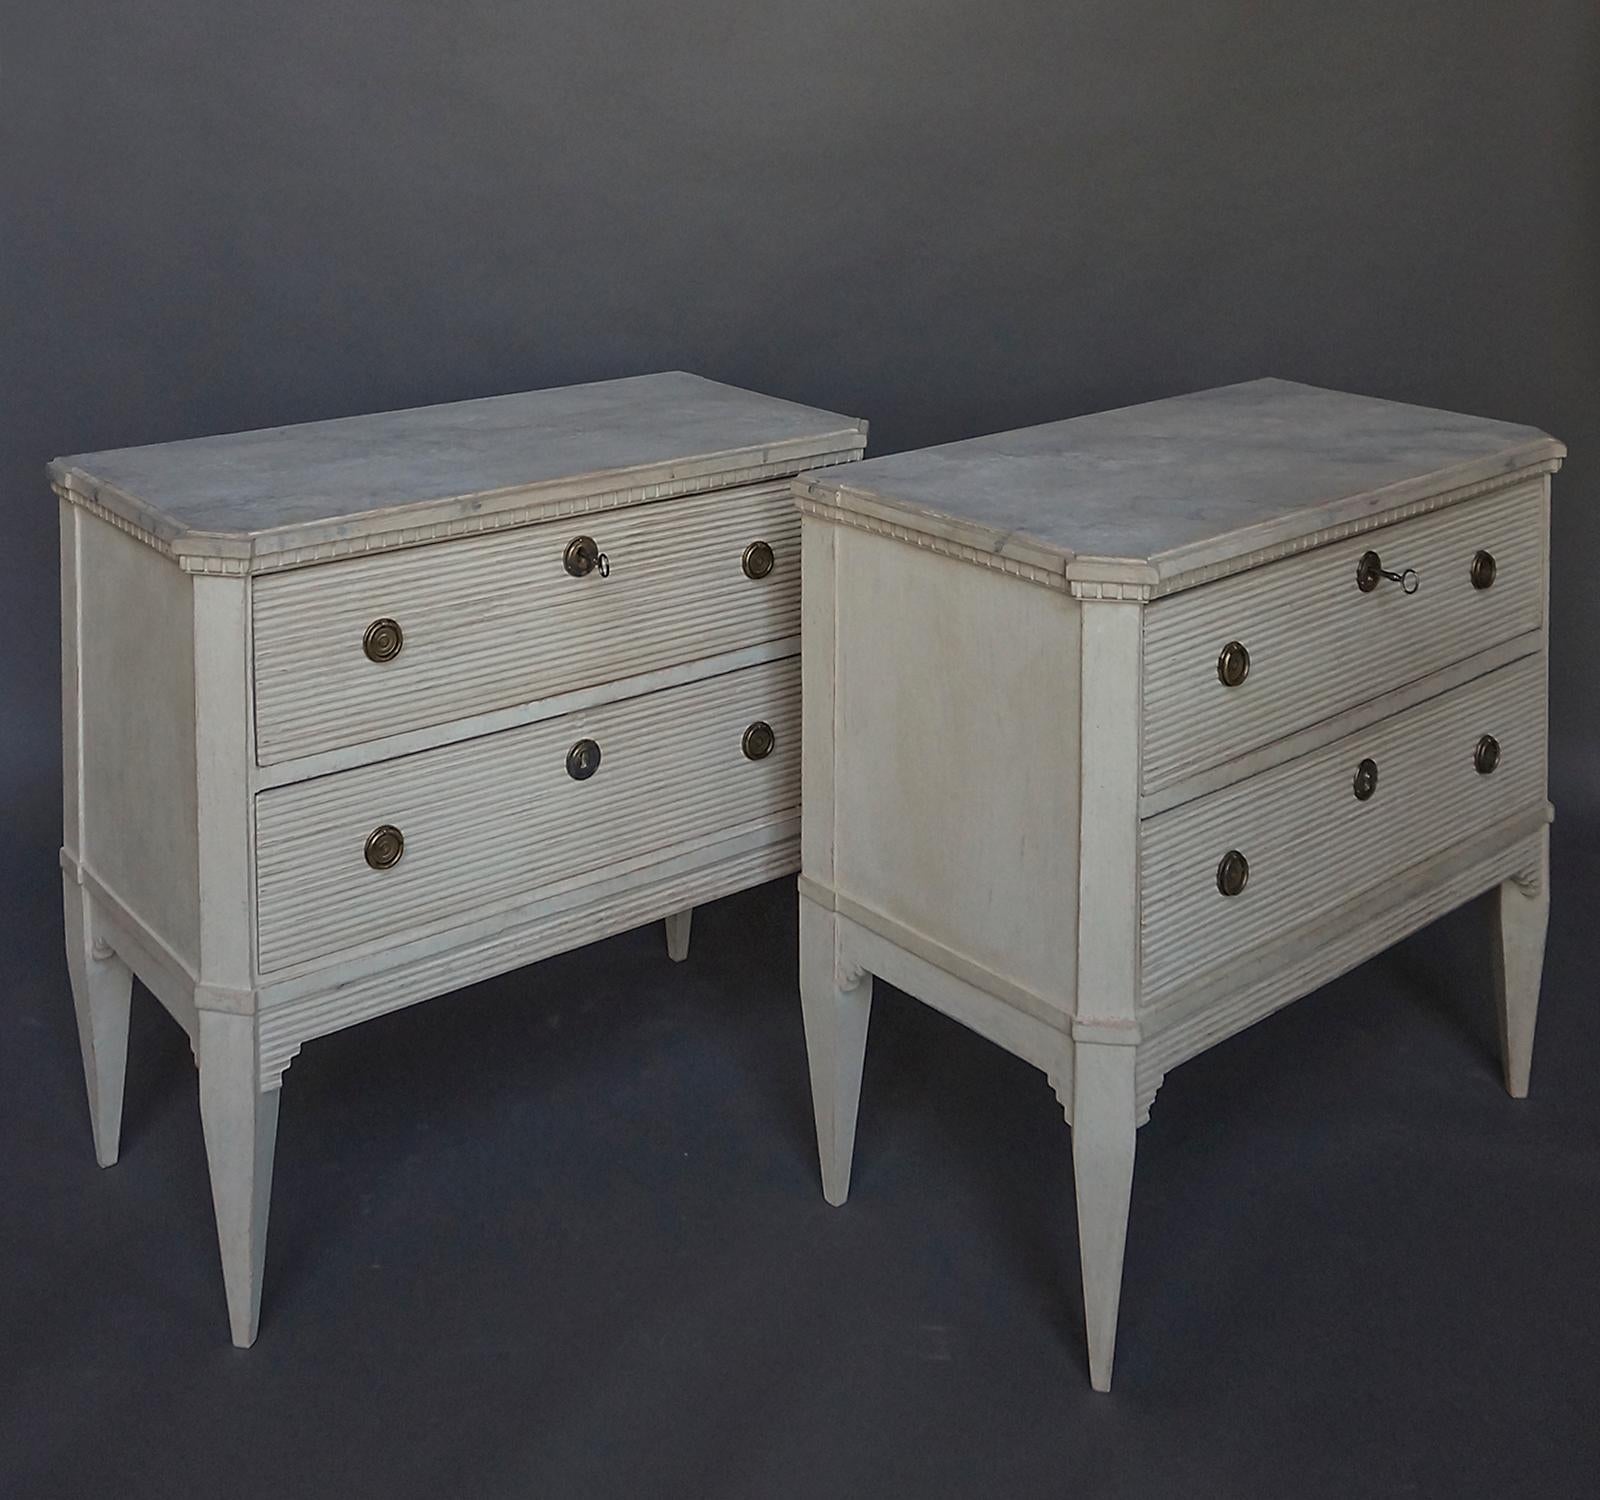 Pair of Swedish commodes, circa 1880, having horizontal reeding on their drawers and aprons. Their shaped tops have dental detail and marbleized surfaces. Canted corner posts extend into tapered square legs. These would be perfect on either side of